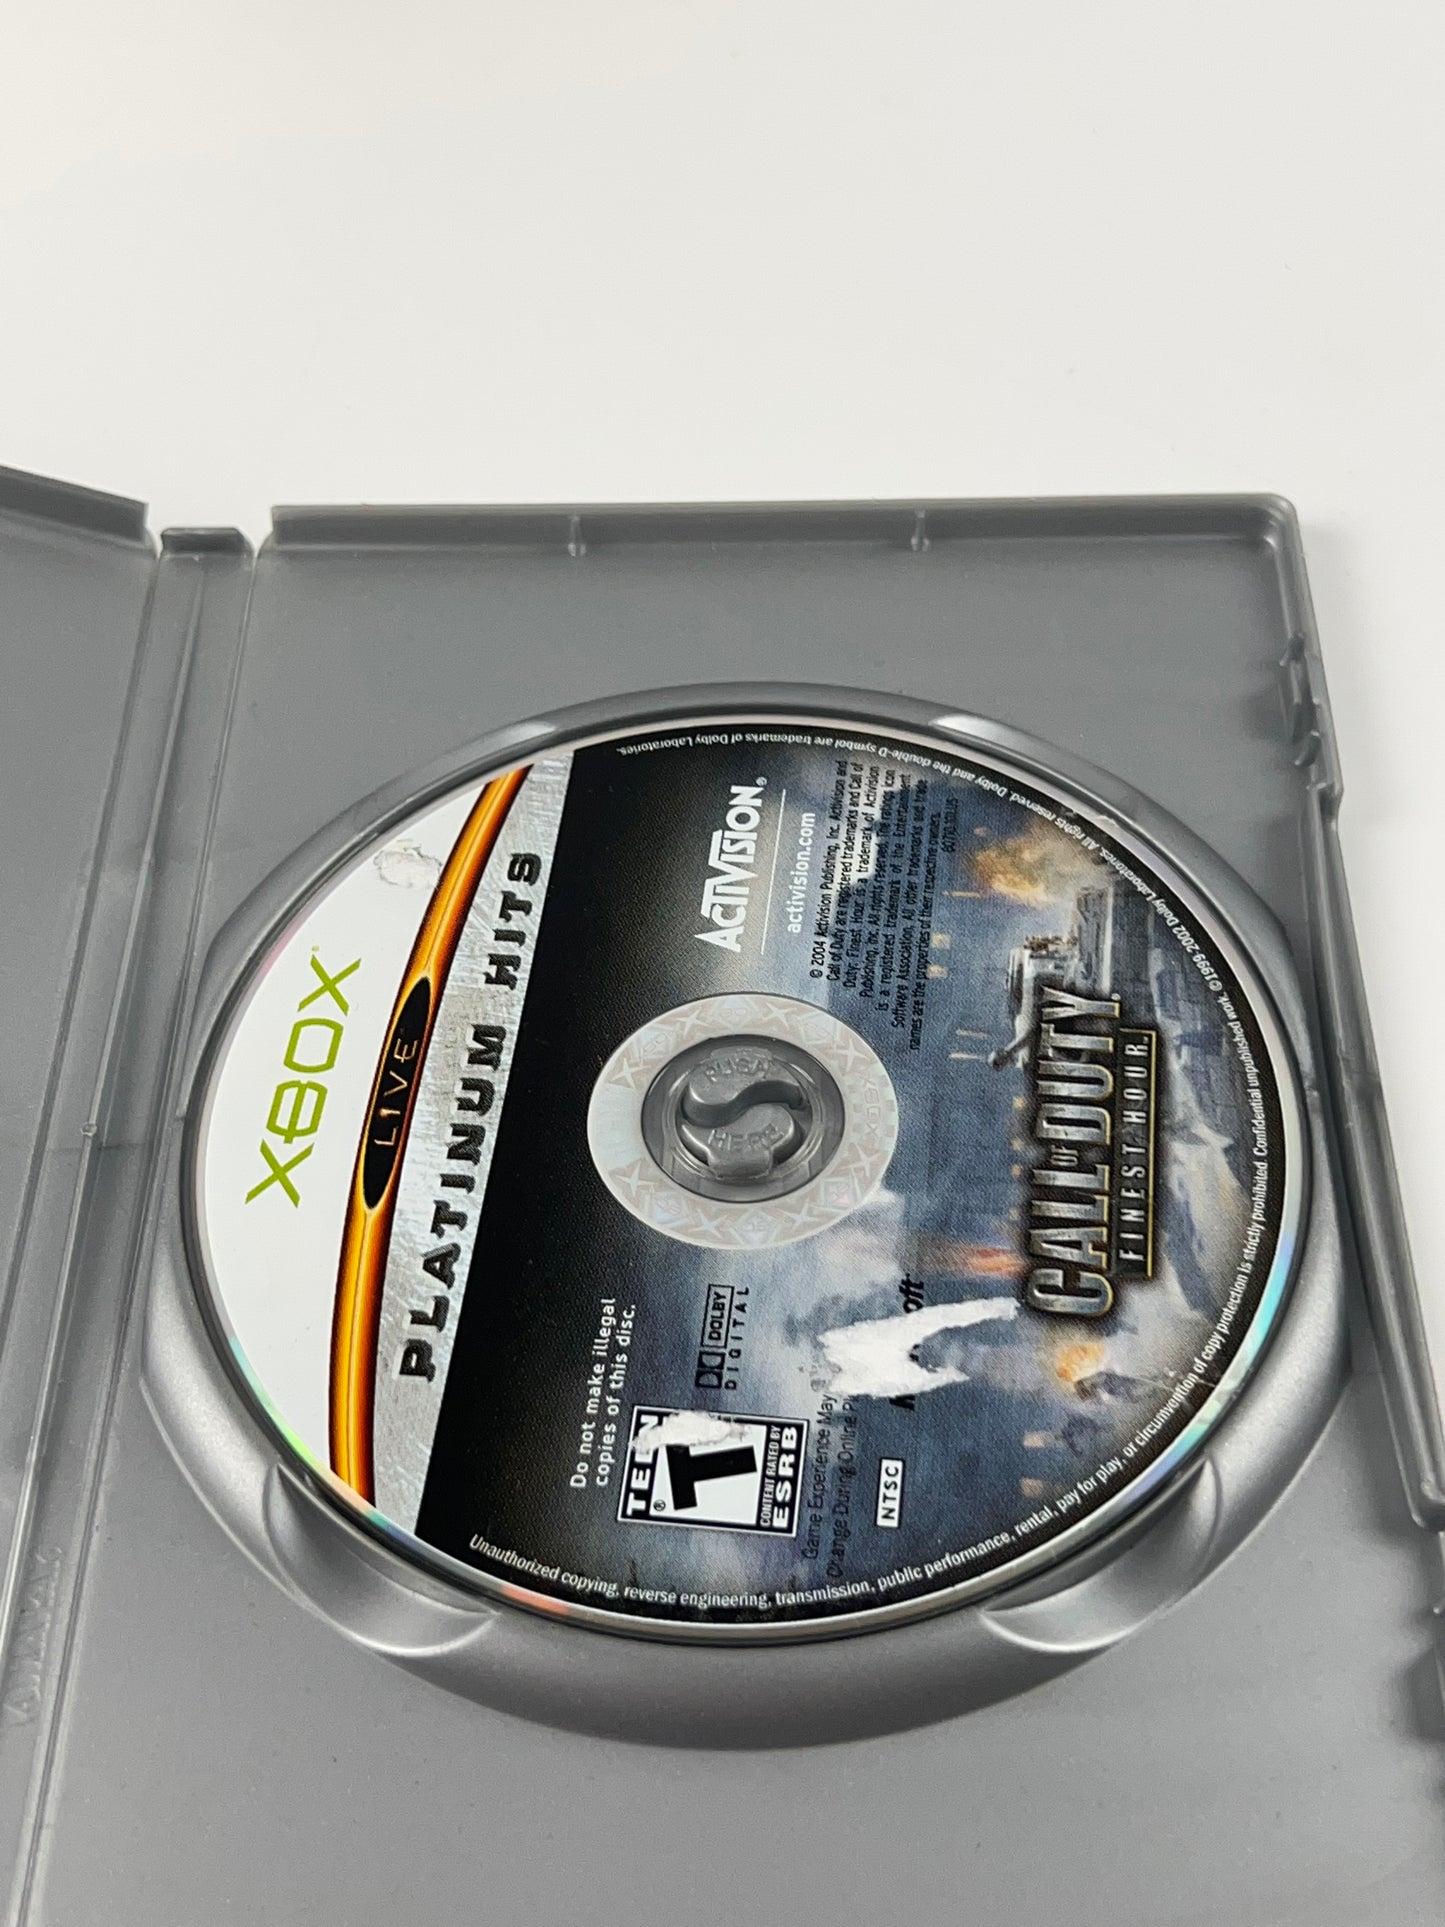 Call of Duty Finest Hour (Xbox, 2004)  Disc & Case Only